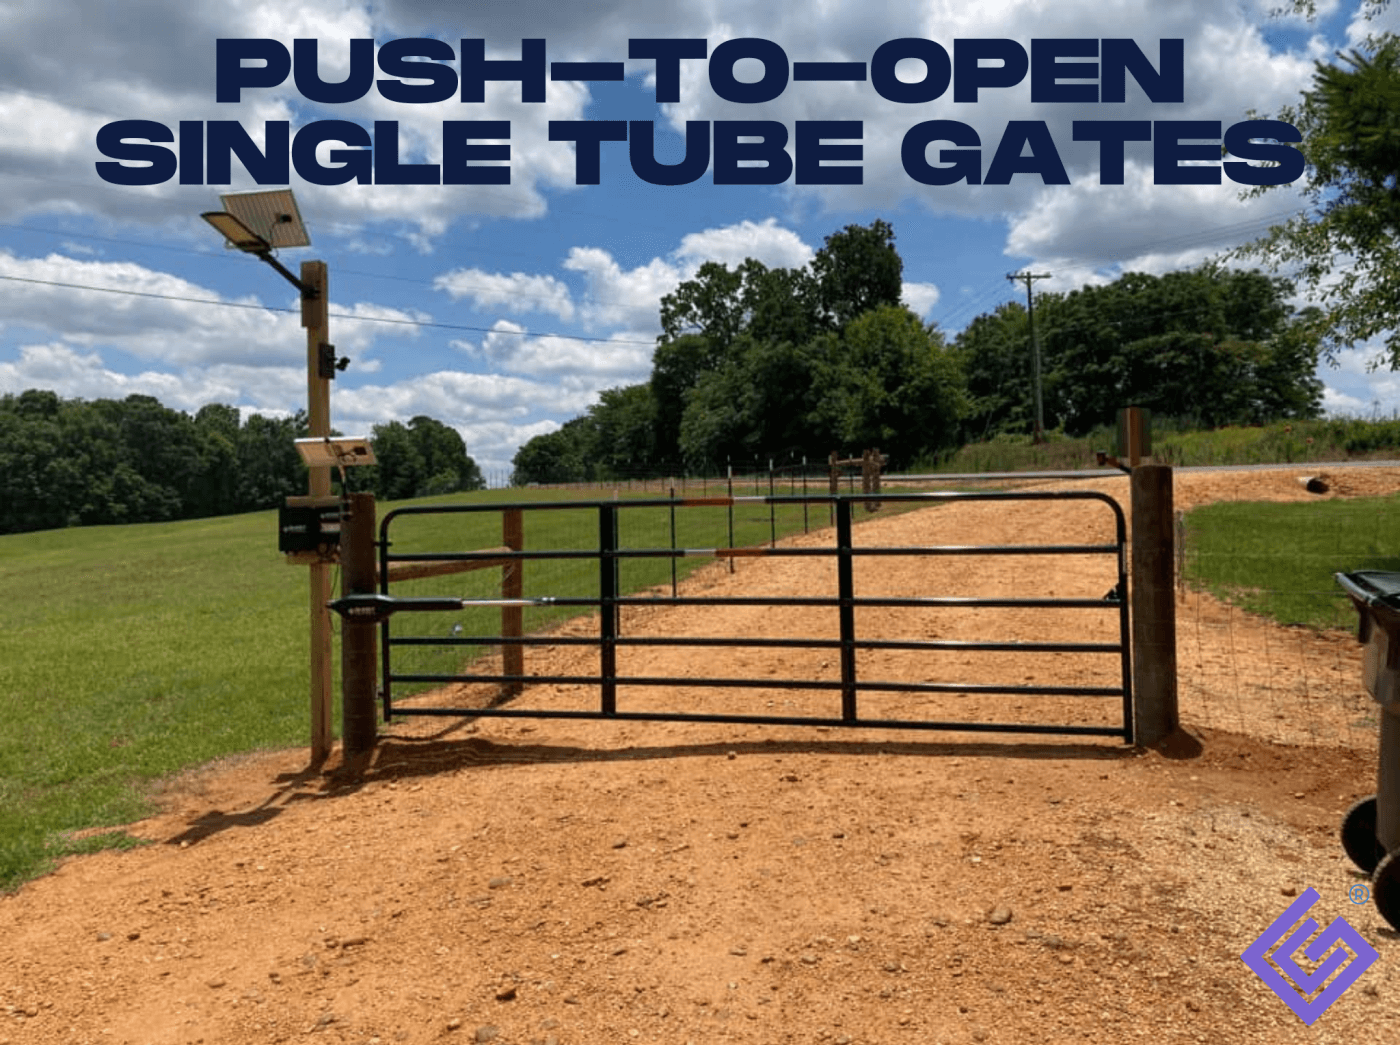 Automatic Gate Openers For Single Push To Open Tube Gates